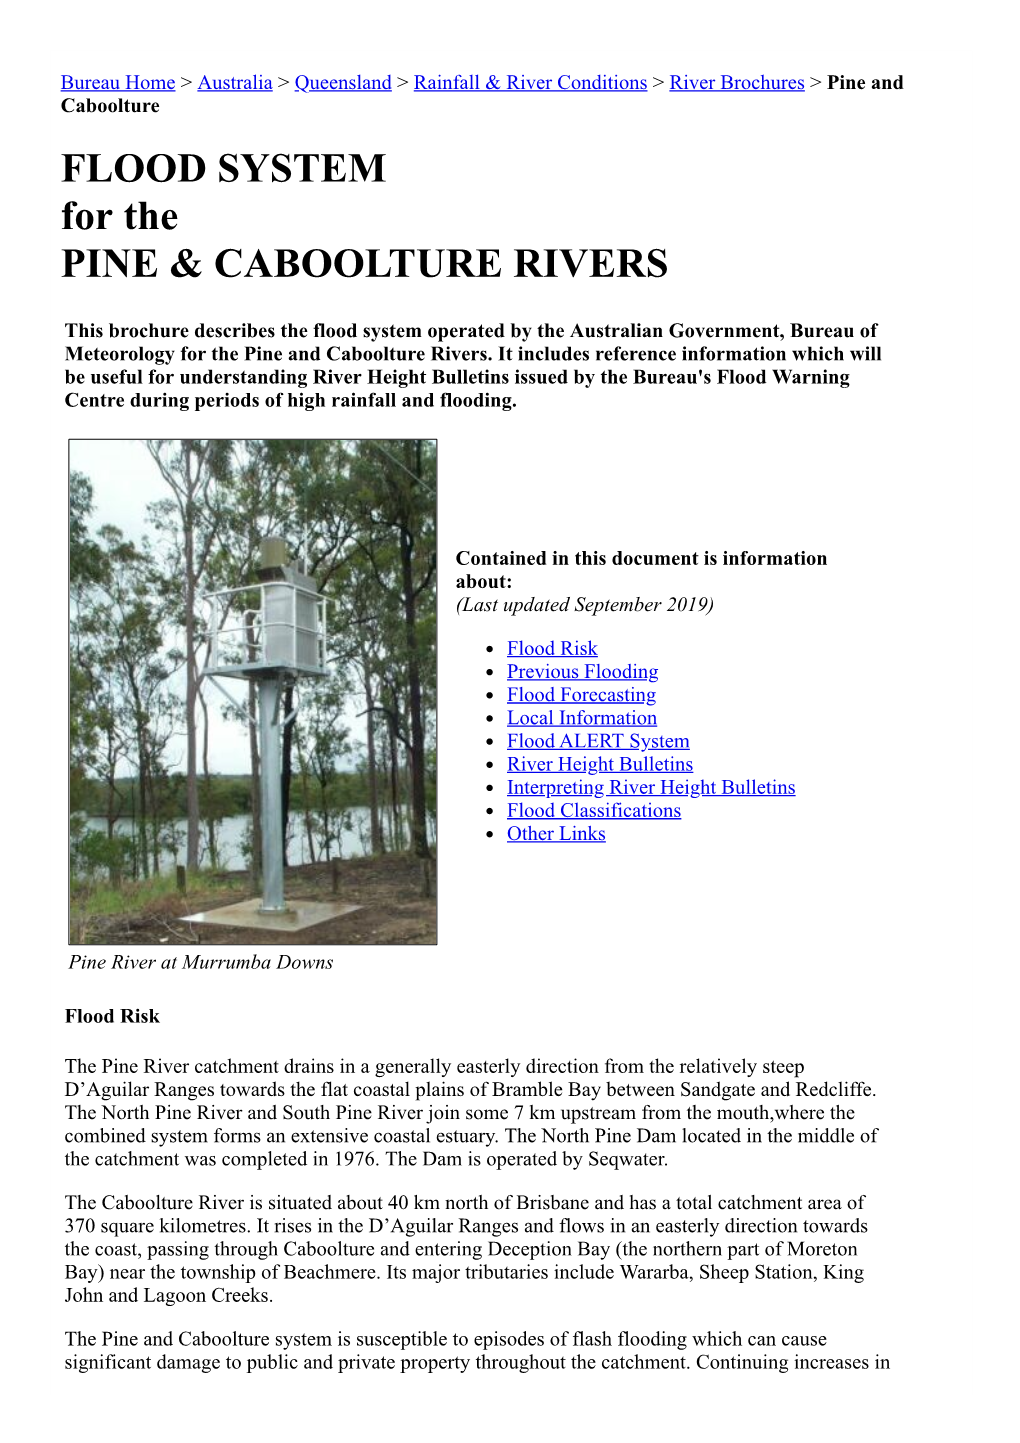 FLOOD SYSTEM for the PINE & CABOOLTURE RIVERS